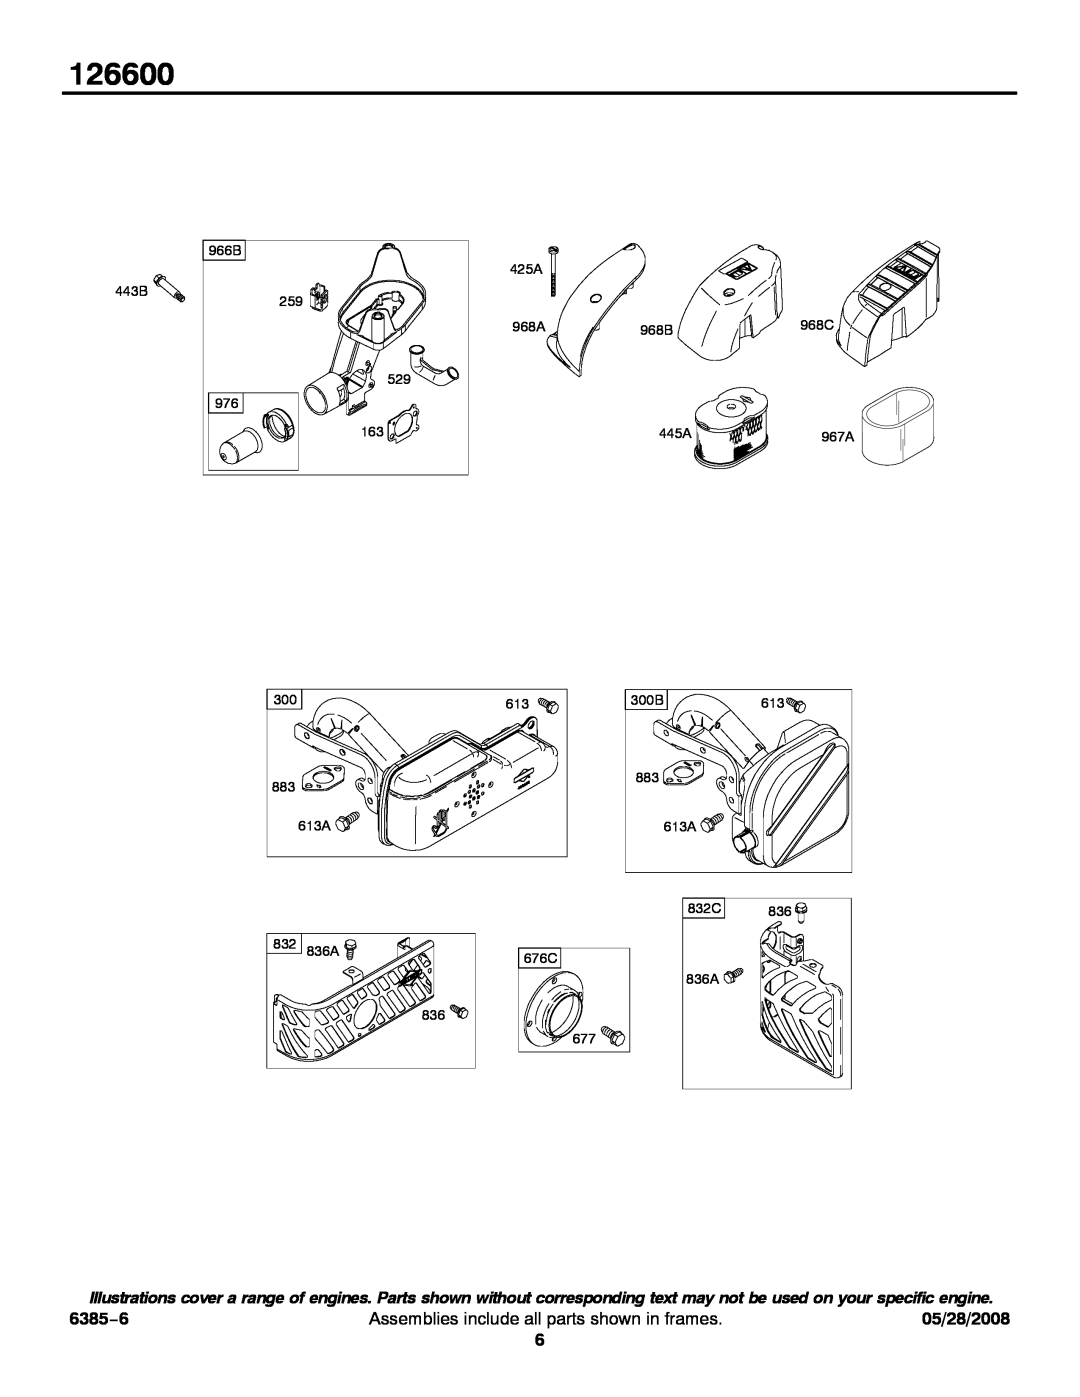 Briggs & Stratton 126600 service manual 6385−6, Assemblies include all parts shown in frames, 05/28/2008 